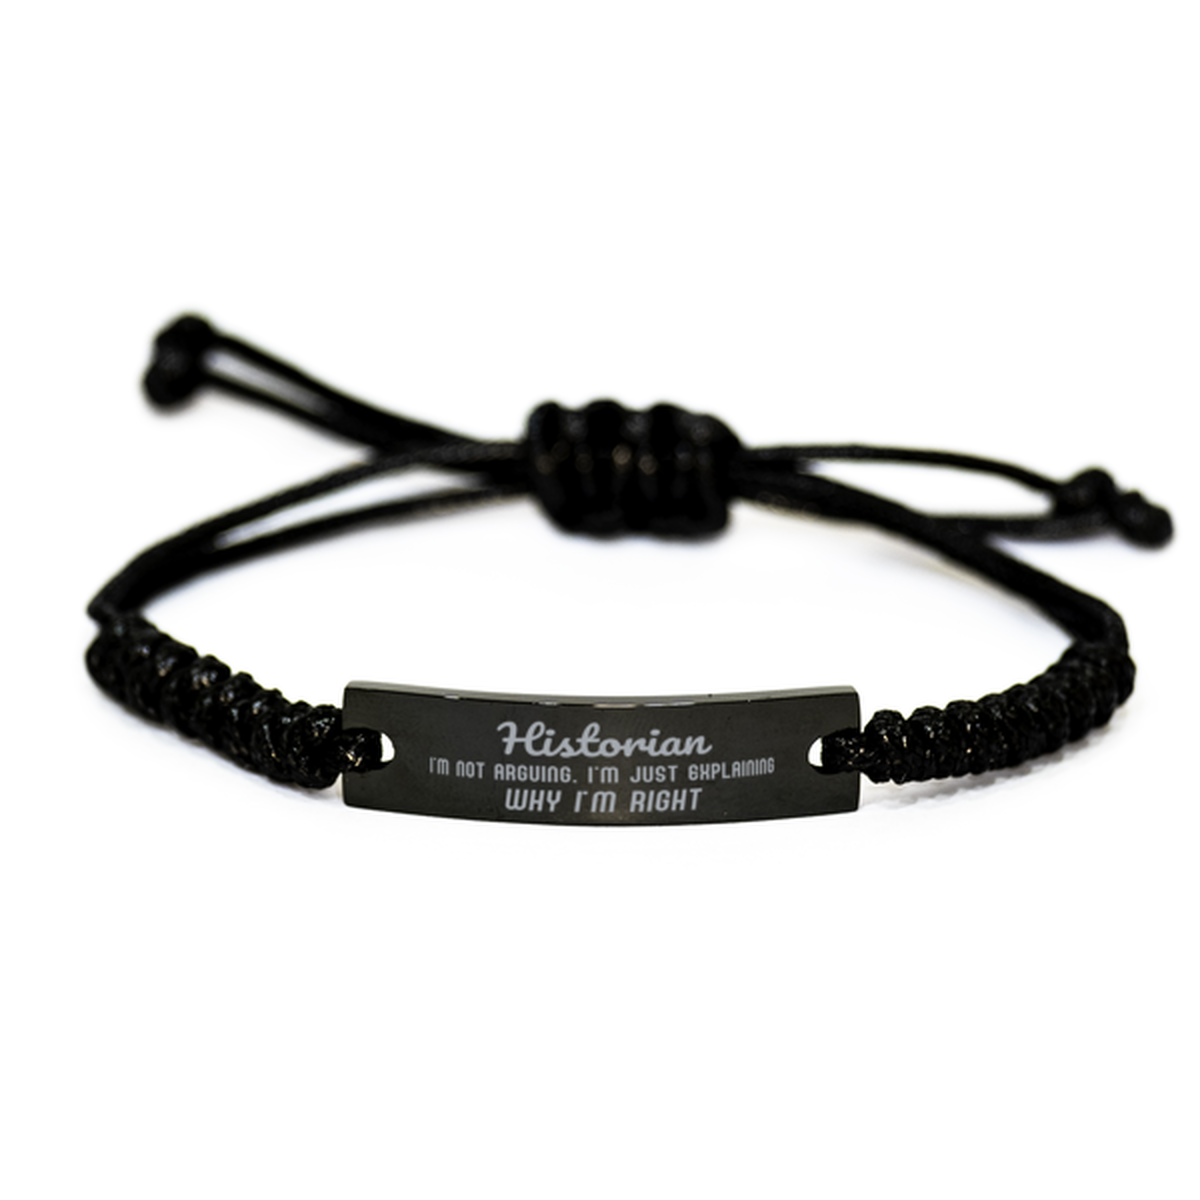 Historian I'm not Arguing. I'm Just Explaining Why I'm RIGHT Black Rope Bracelet, Funny Saying Quote Historian Gifts For Historian Graduation Birthday Christmas Gifts for Men Women Coworker